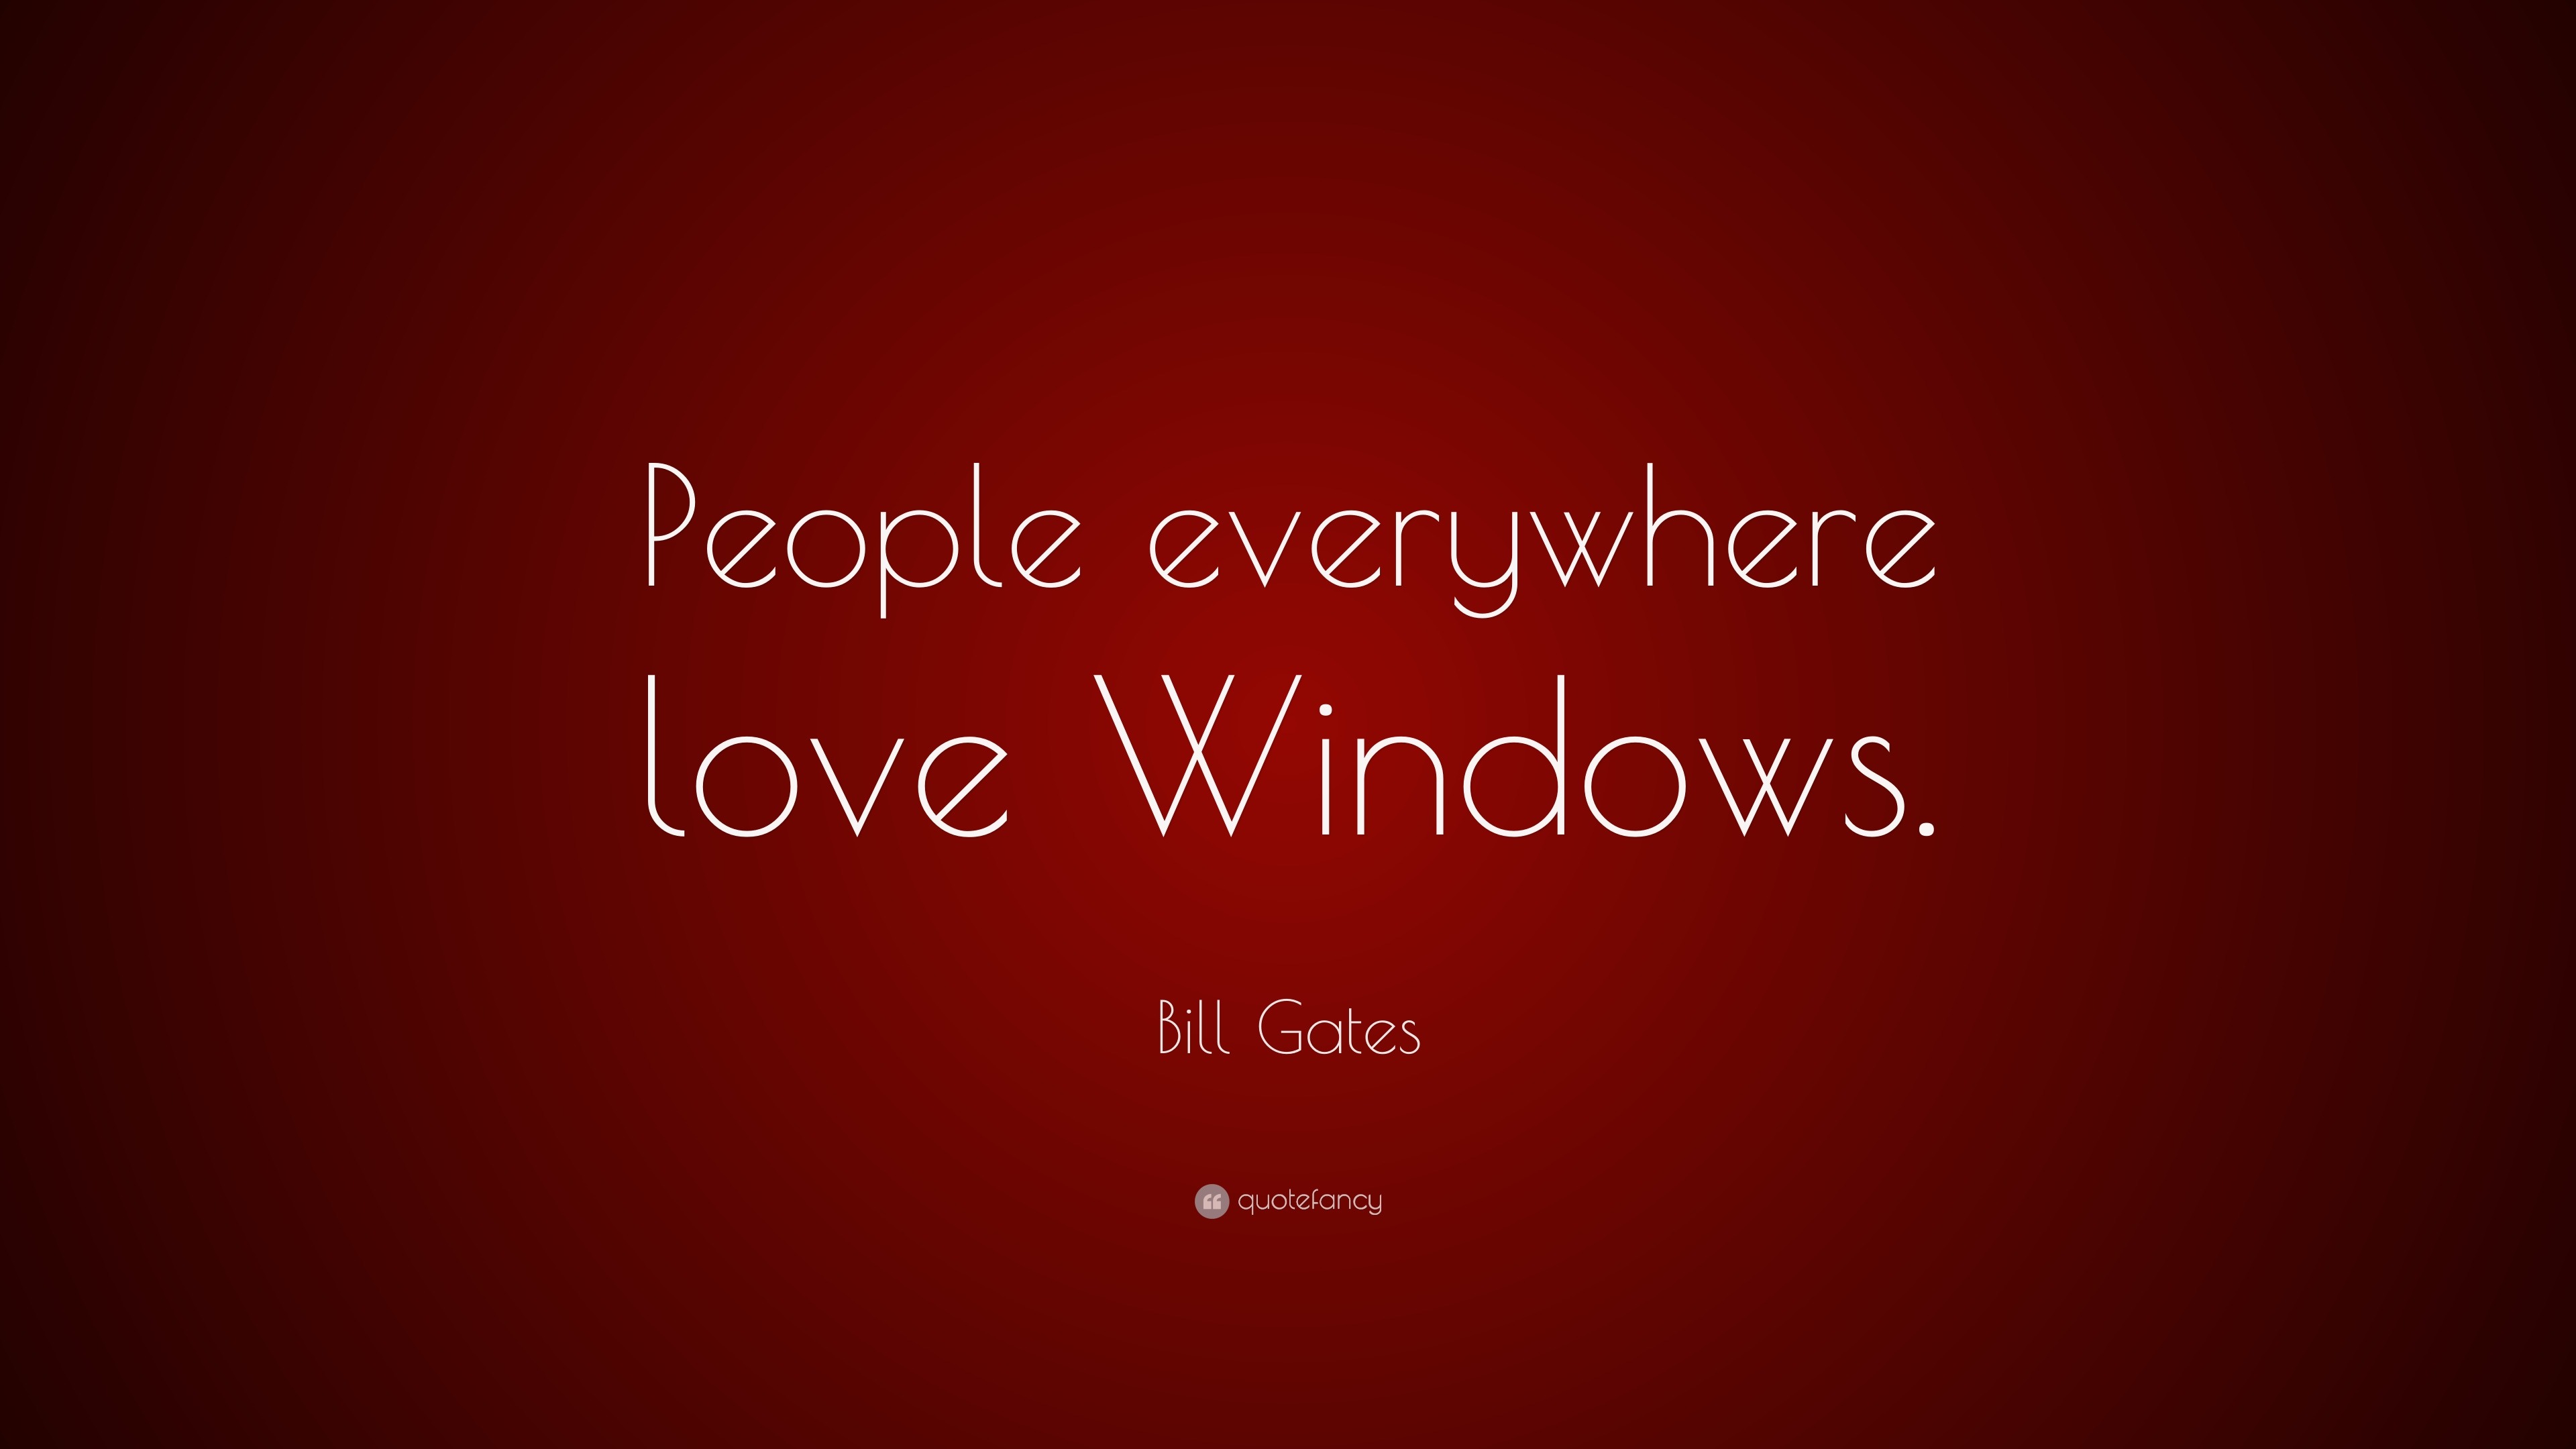 Bill Gates Quote: “People everywhere love Windows.” (12 ...